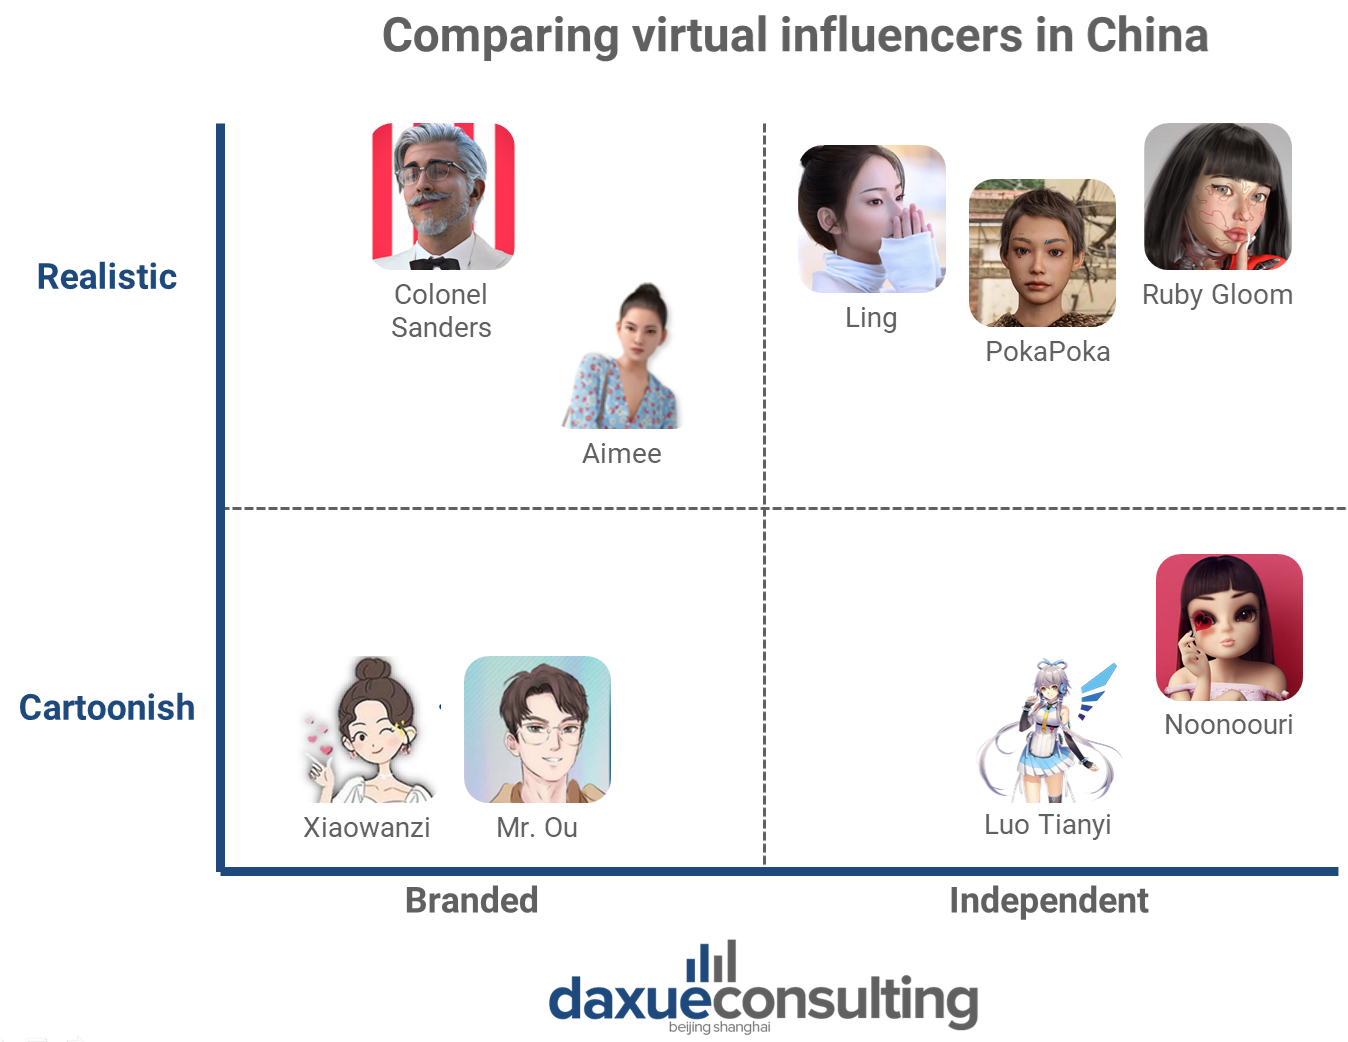 comparing virtual influencers in China on a scale of branded to independent, and cartoonish to realistic